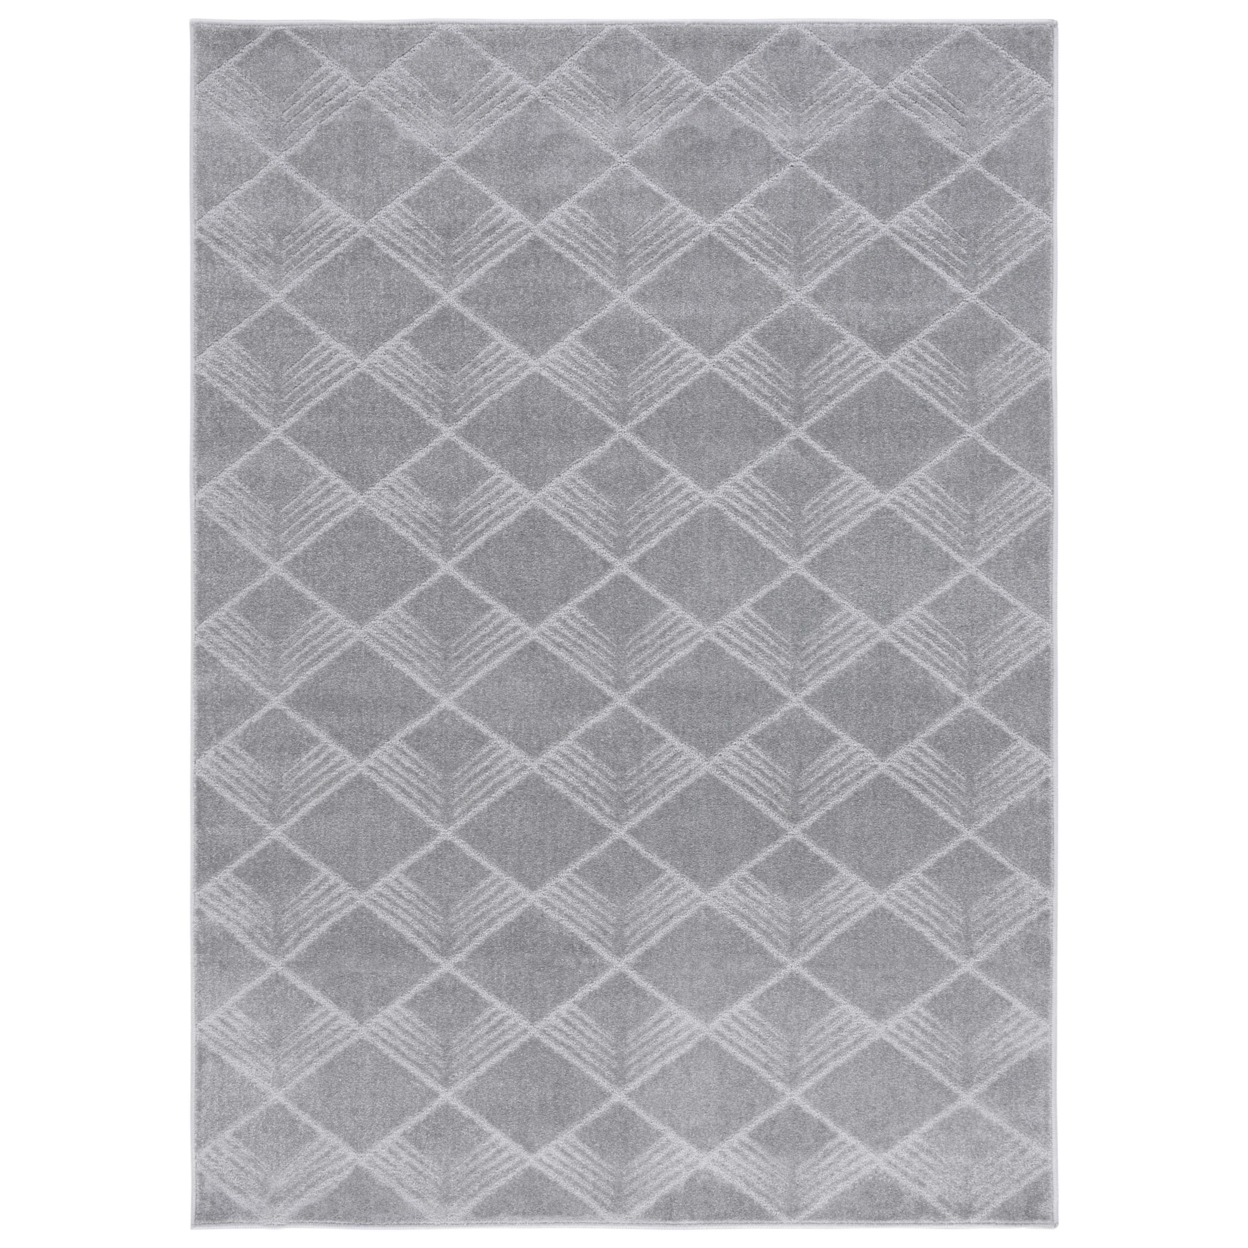 Safavieh PNS414F Pattern And Solid Grey - Charcoal / Ivory, 5'-3 X 7'-6 Rectangle